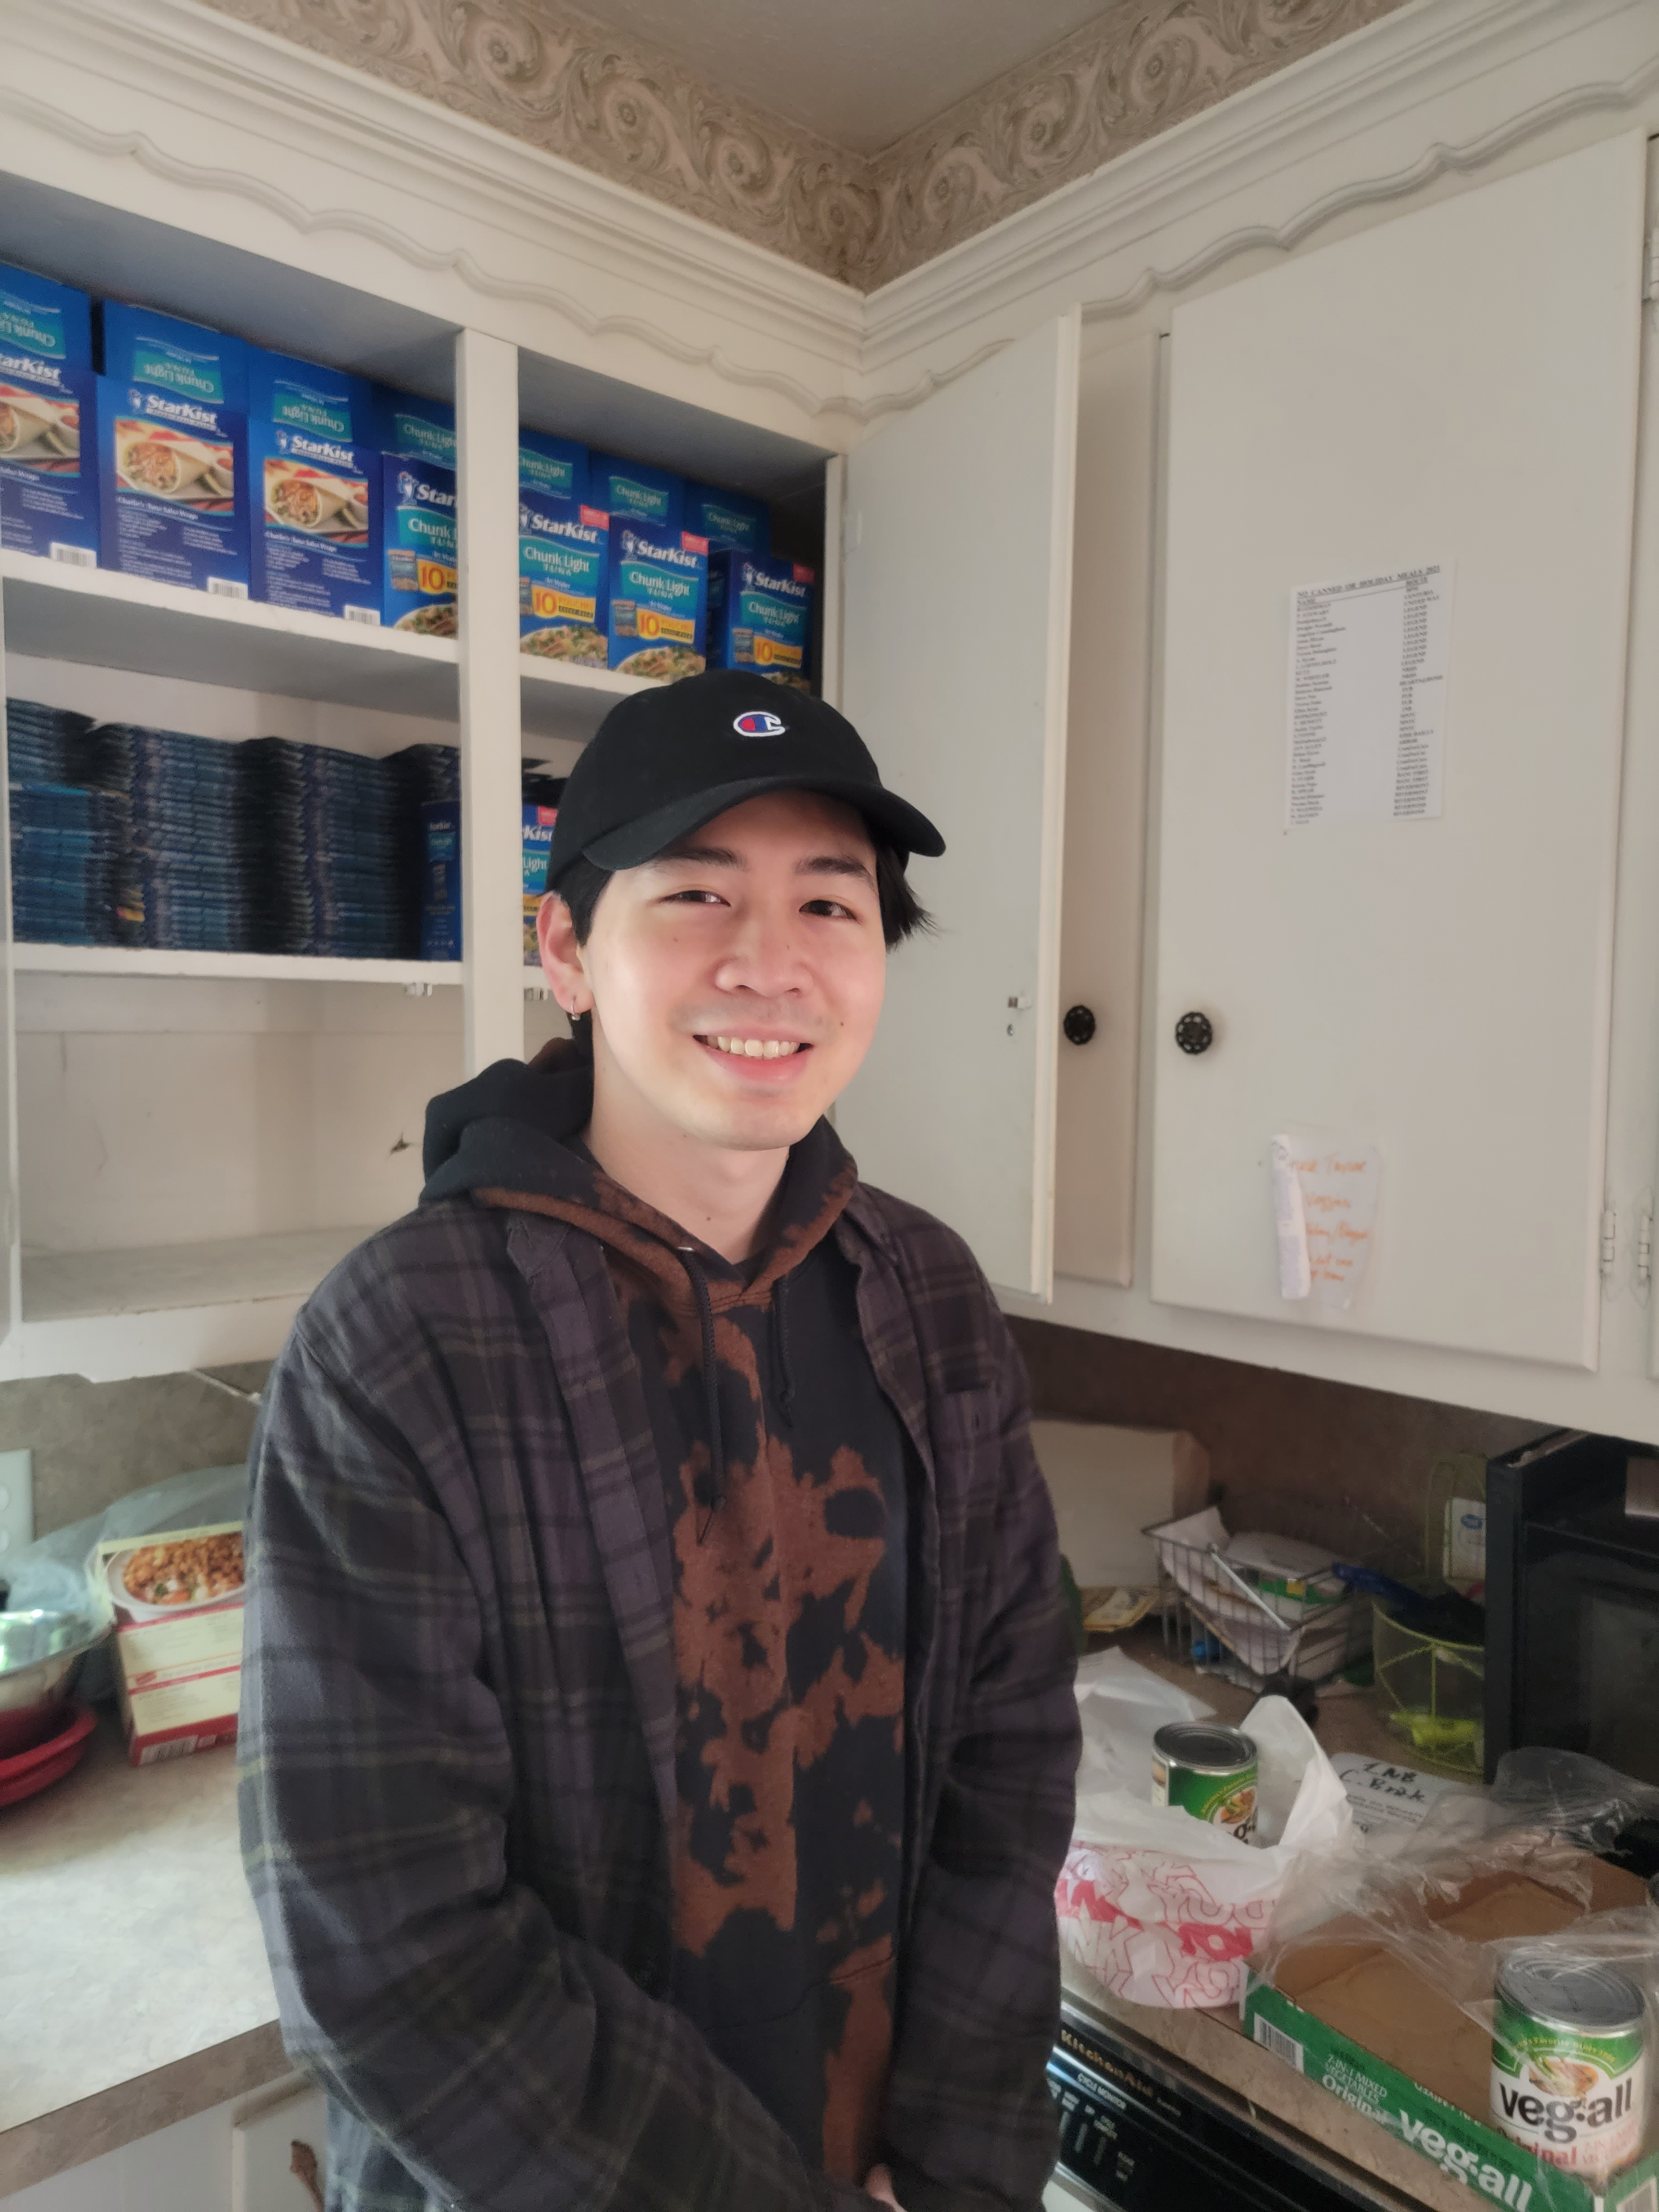 OU federal work study student, Tony Dang, putting together Meals on Wheels.